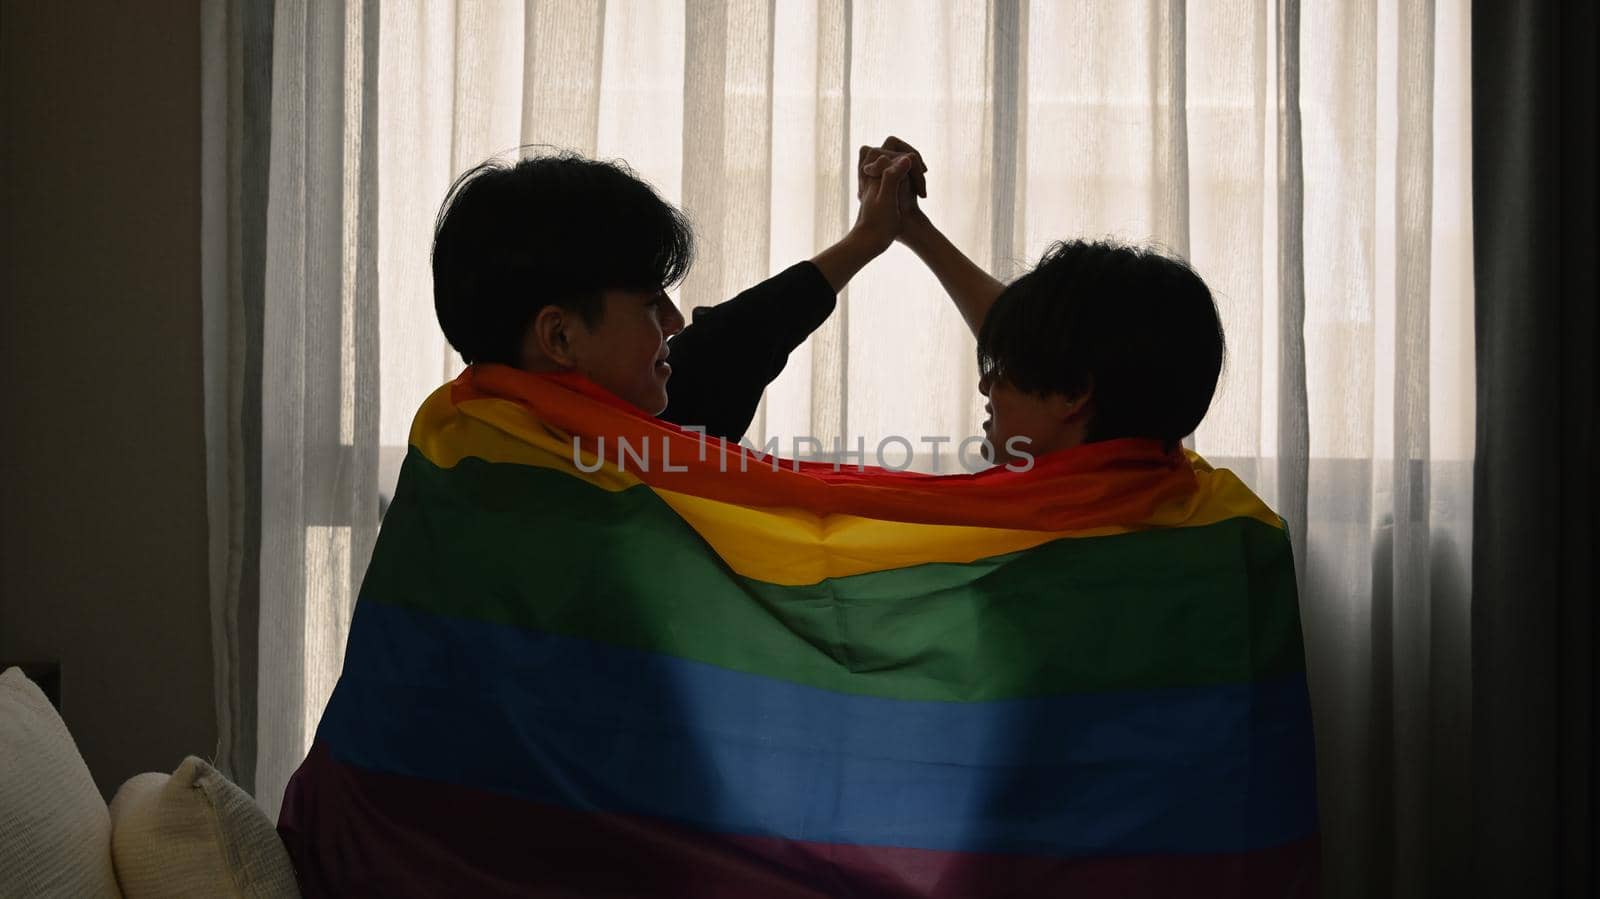 Happy gay couple expressing their love to each other under LGBTQ pride flag. Concept of sexual freedom and equal rights for LGBT community.